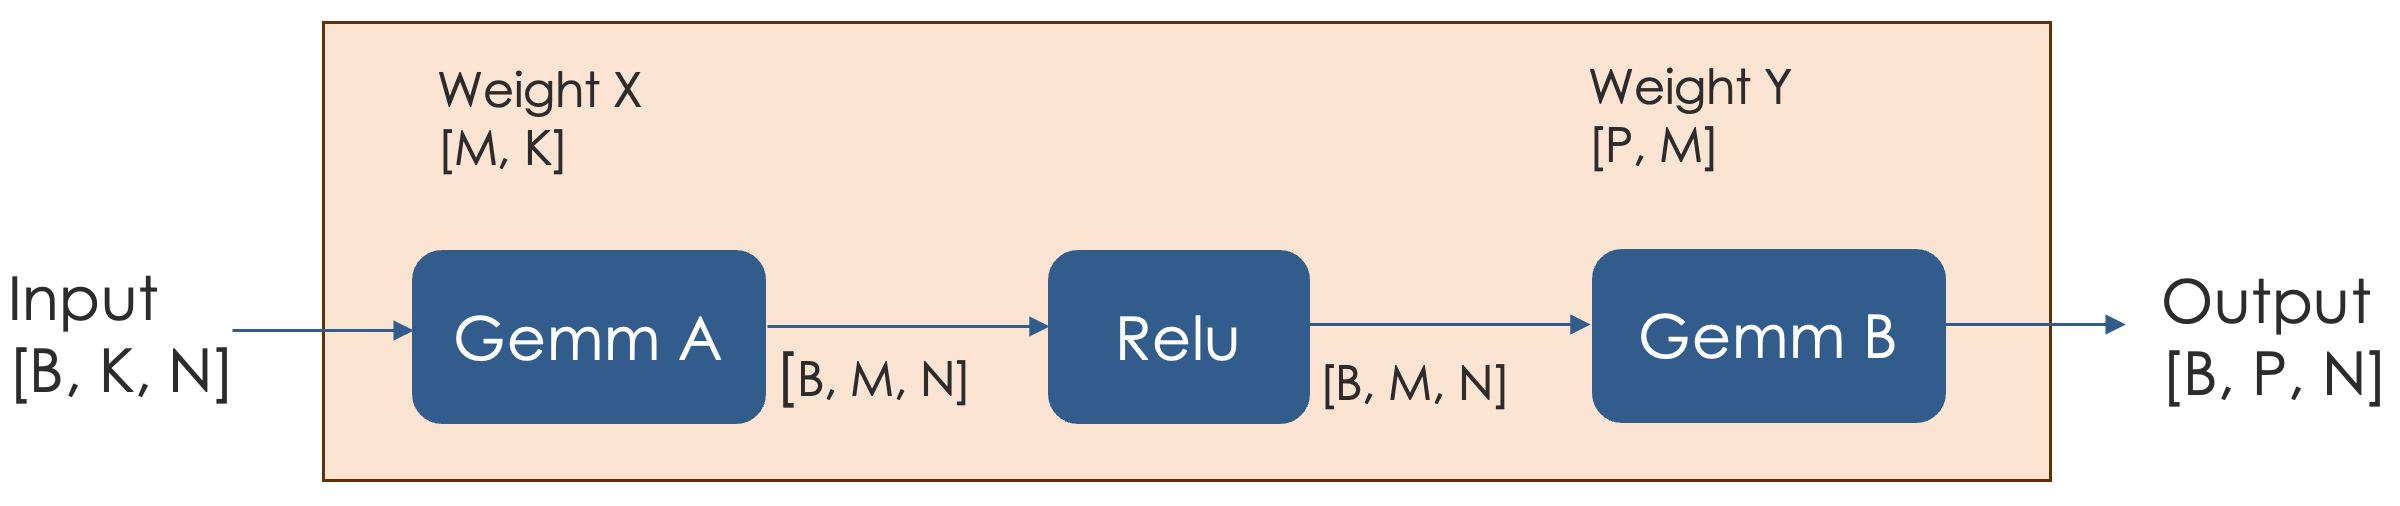 computation for 1 RDU before tensor parallel is applied